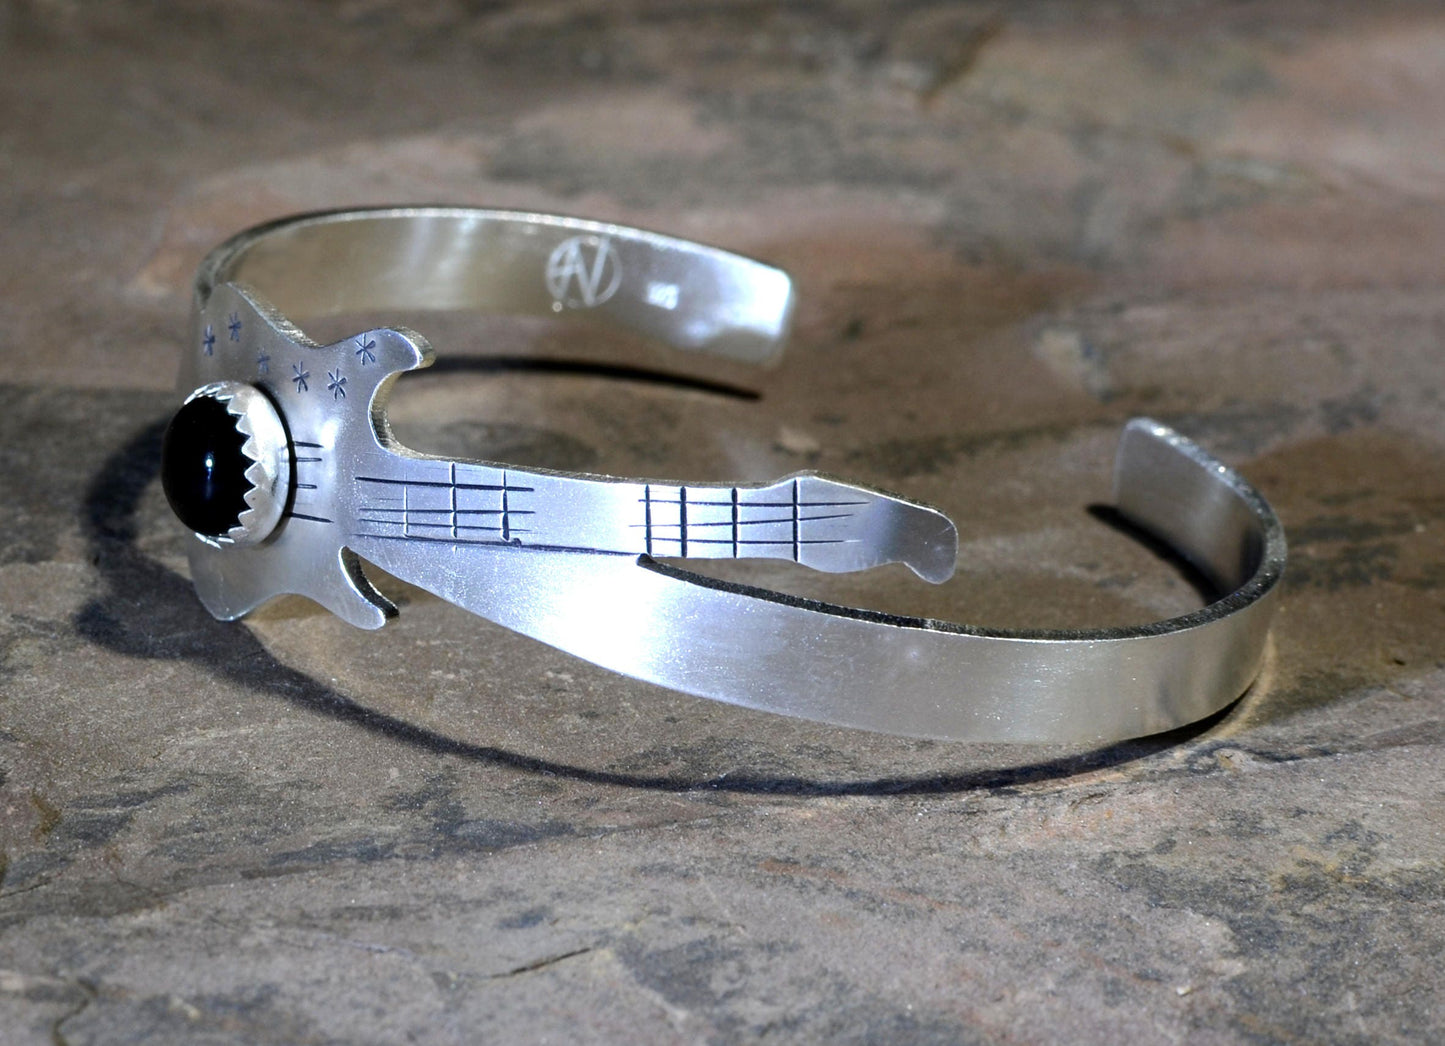 Sterling silver guitar bracelet with musical inspiration and black onyx gemstone